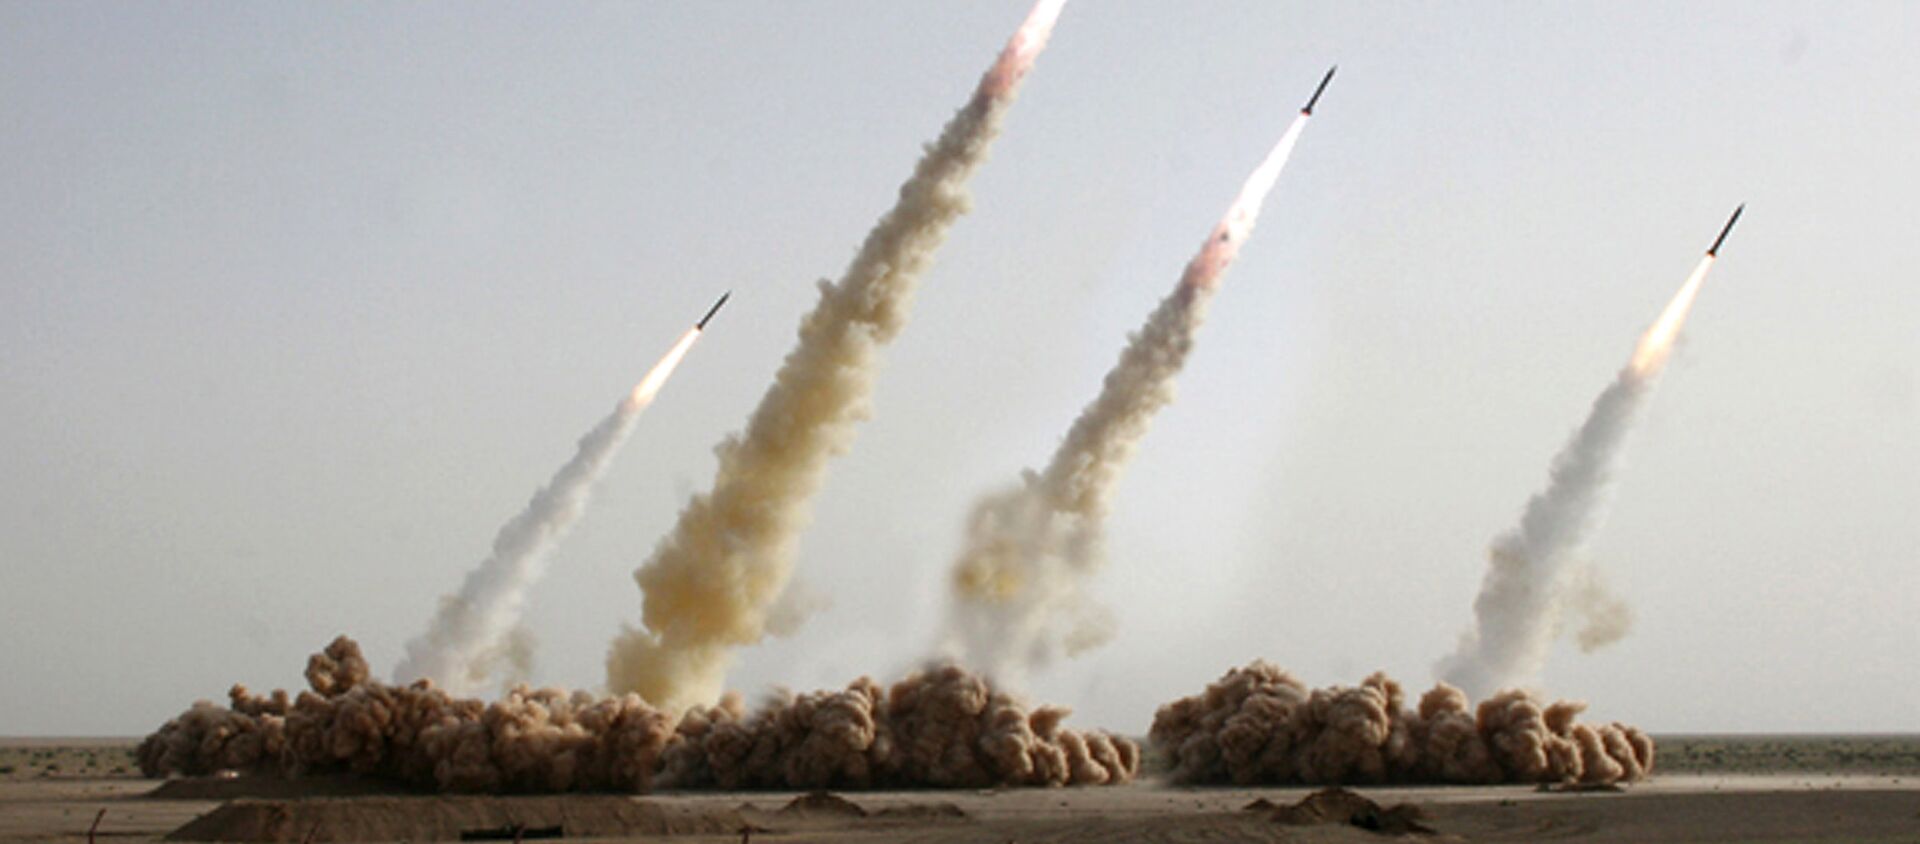 A handout picture released on the news website and public relations arm of Iran's Revolutionary Guards, Sepah News, shows an image apparently digitally altered to show four missiles rising into the air instead of three during a test-firing at an undisclosed location in the Iranian desert (File) - Sputnik International, 1920, 03.07.2017